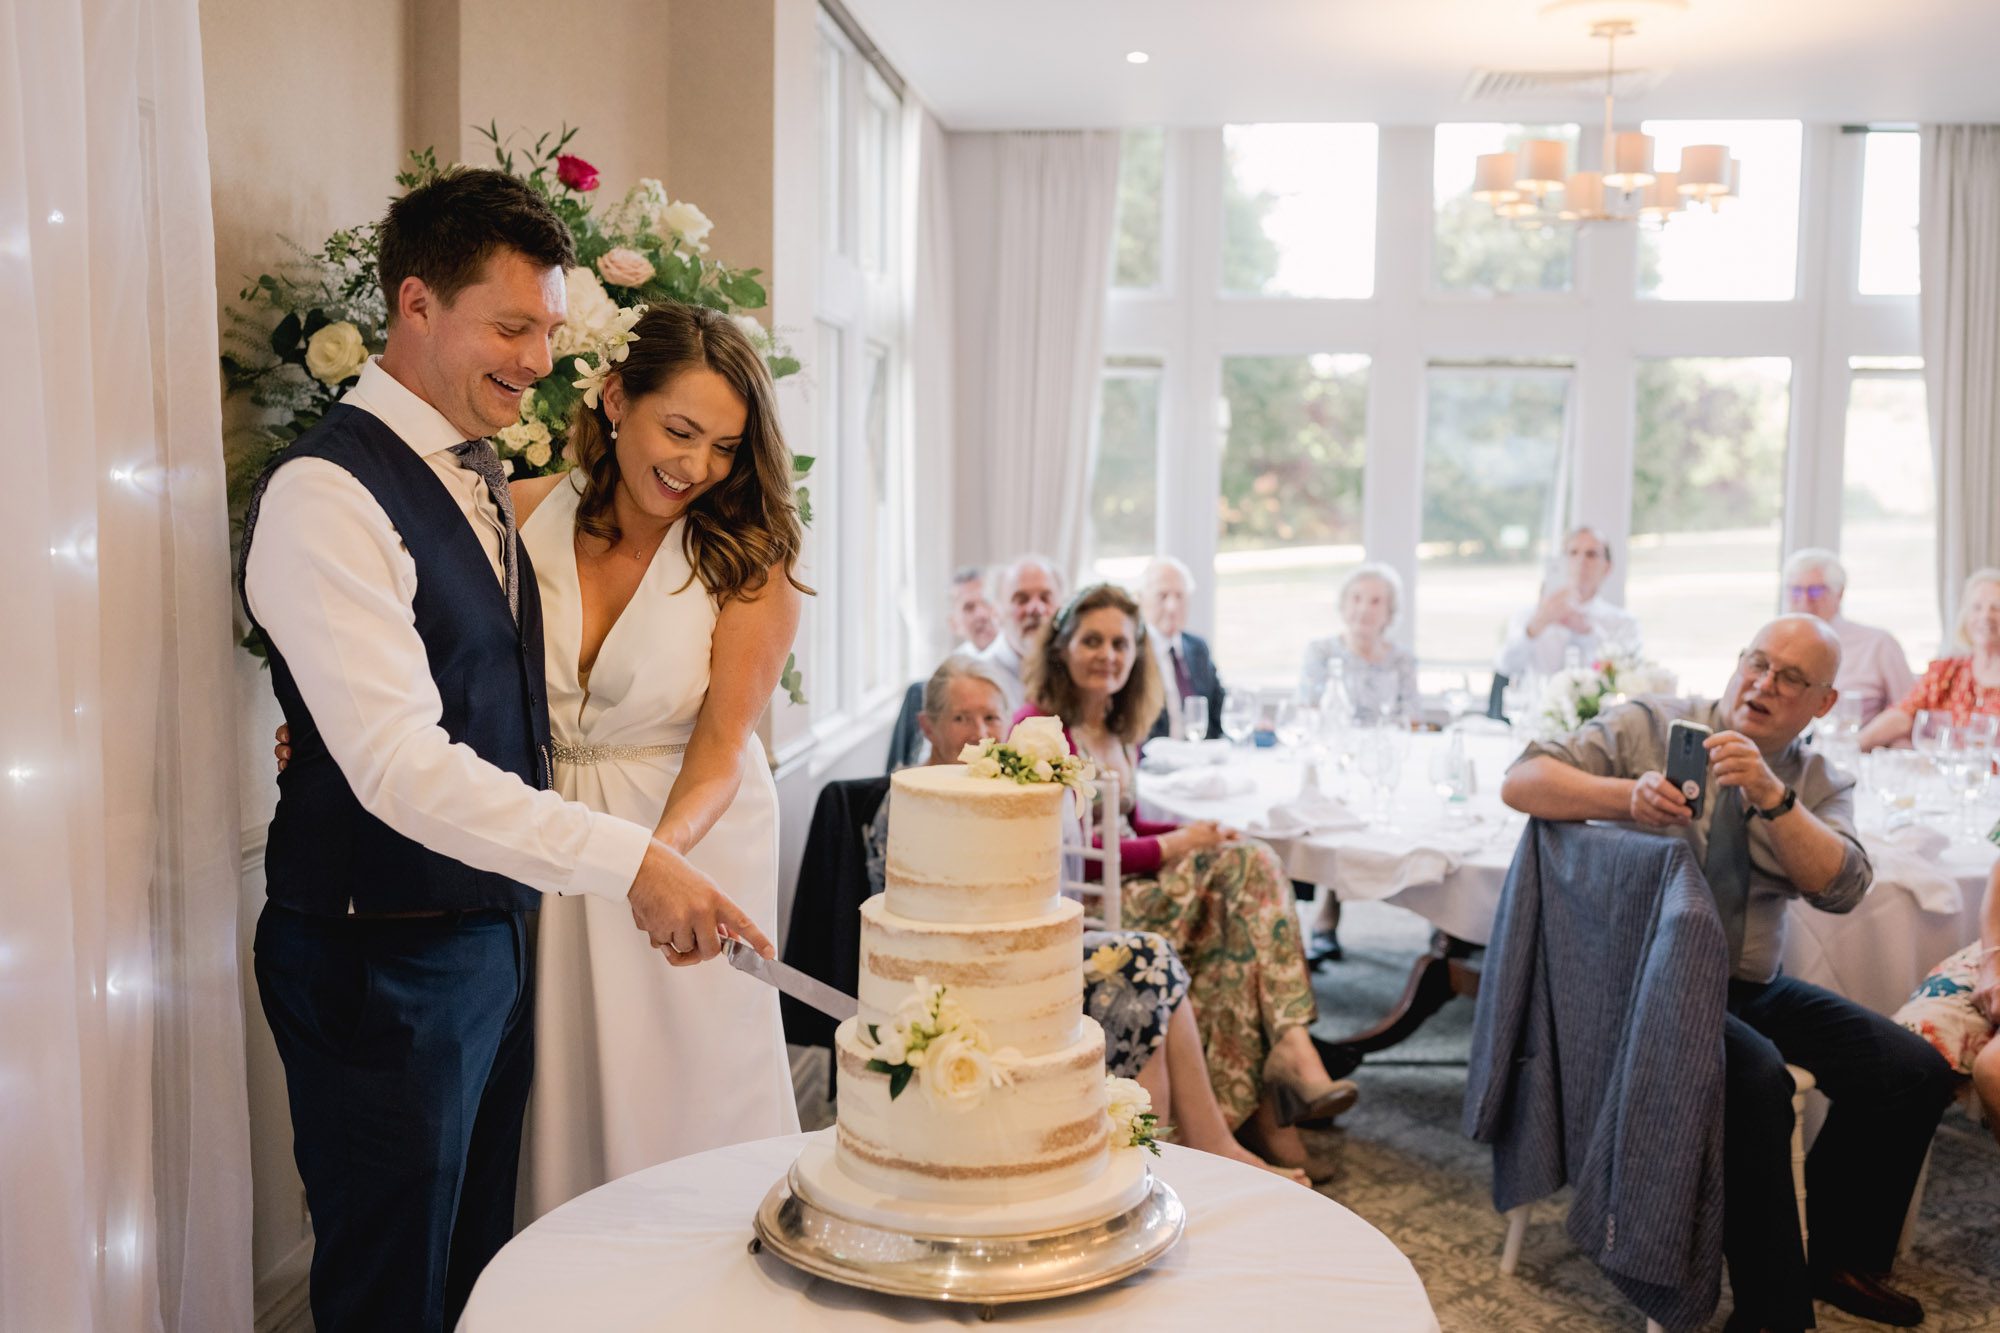 Bride and groom cut their wedding cake at Hartsfield Manor.